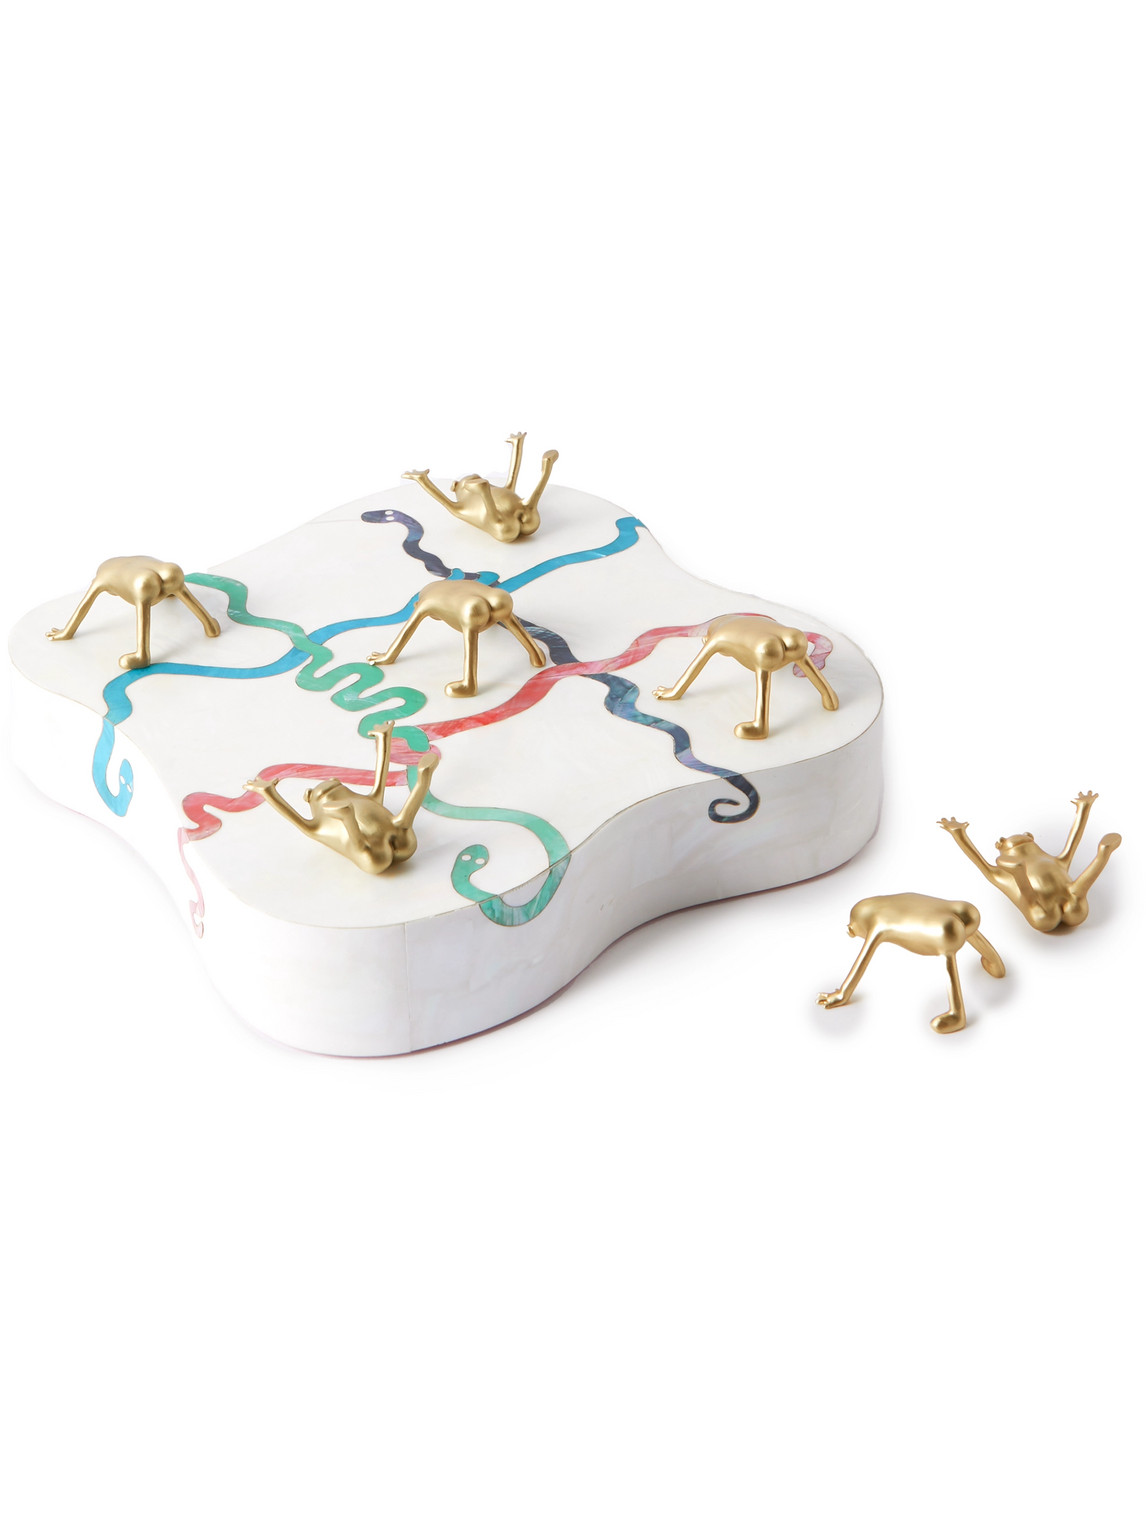 L'Objet - Haas Brothers Mother-Of-Pearl and Brass Tic-Tac-Toe Set - Men - White von L'Objet